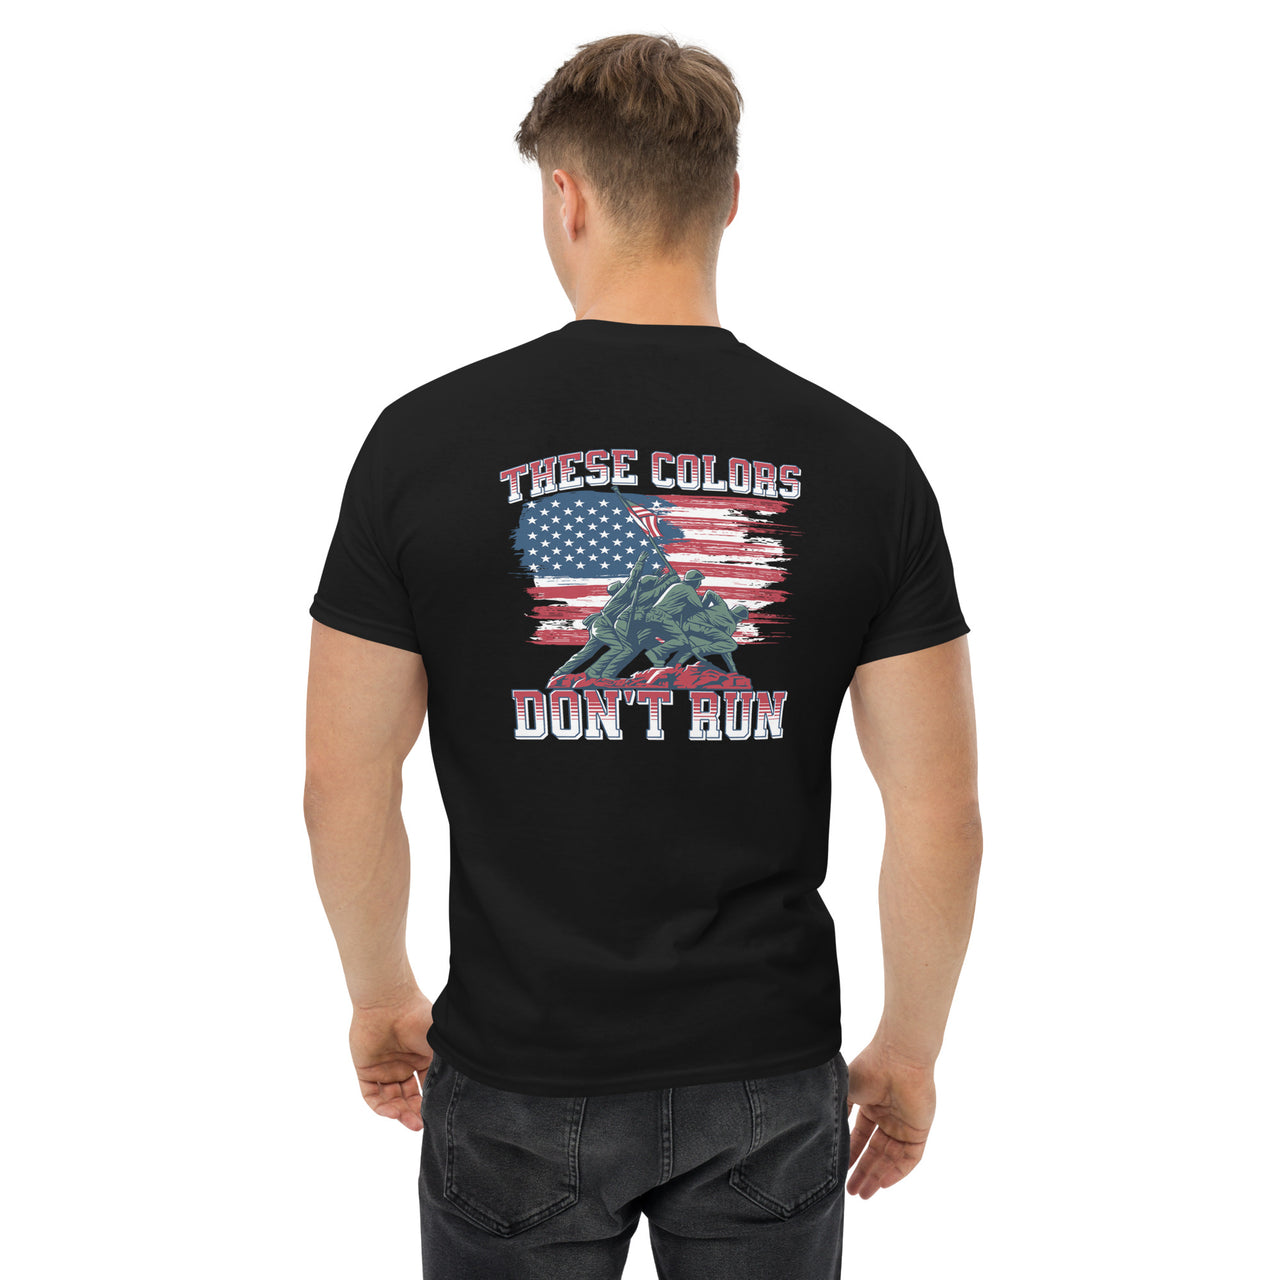 These Colors Don't Run Men's classic tee Image On Back